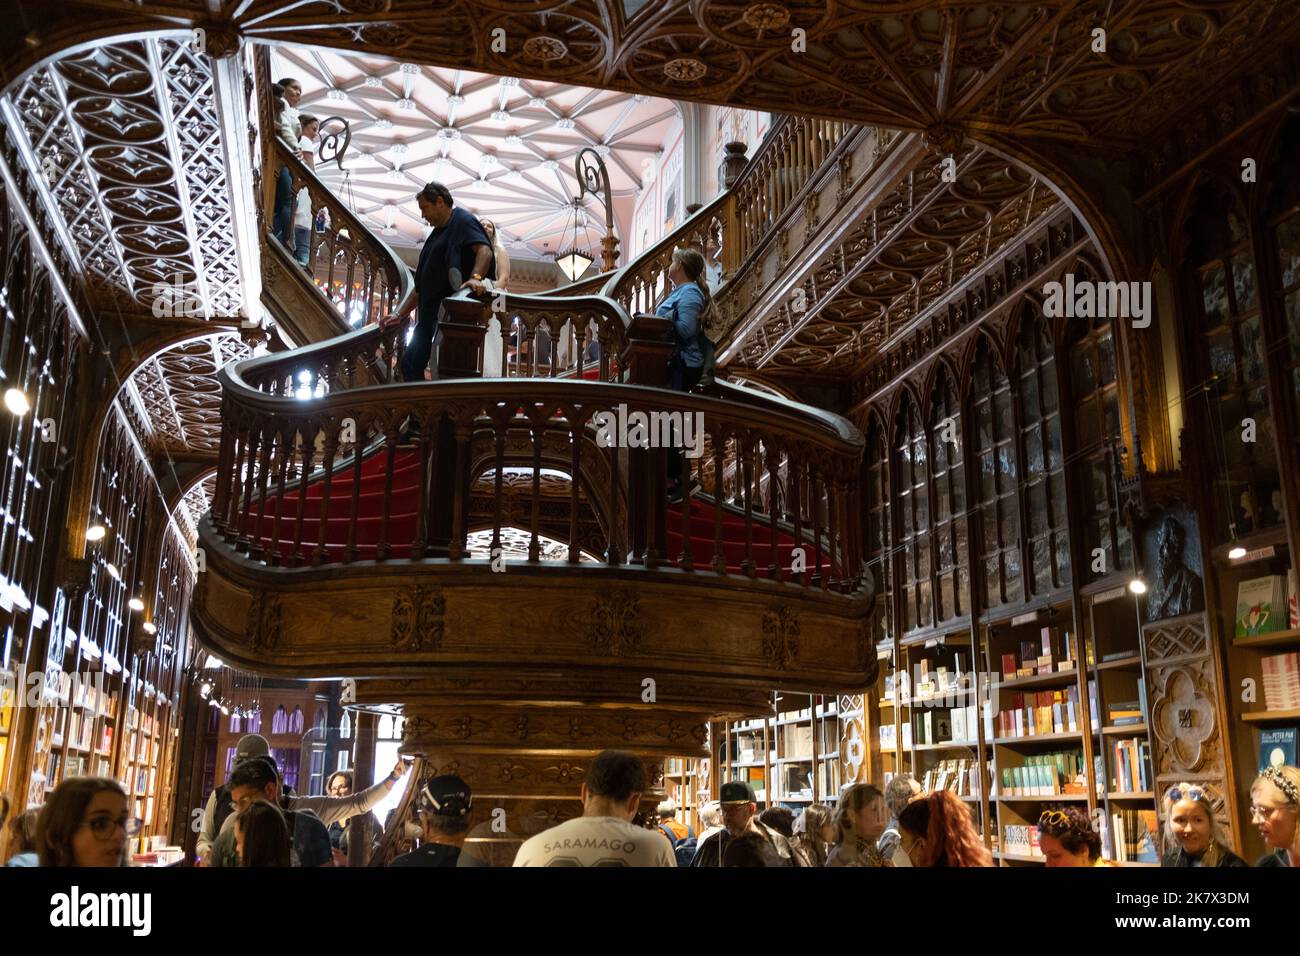 The Livraria Lello book shop which is said to have inspired sets in the Harry Potter movies, written by JK Rowling. in Porto, Portugal, 17 October, 2022. Stock Photo